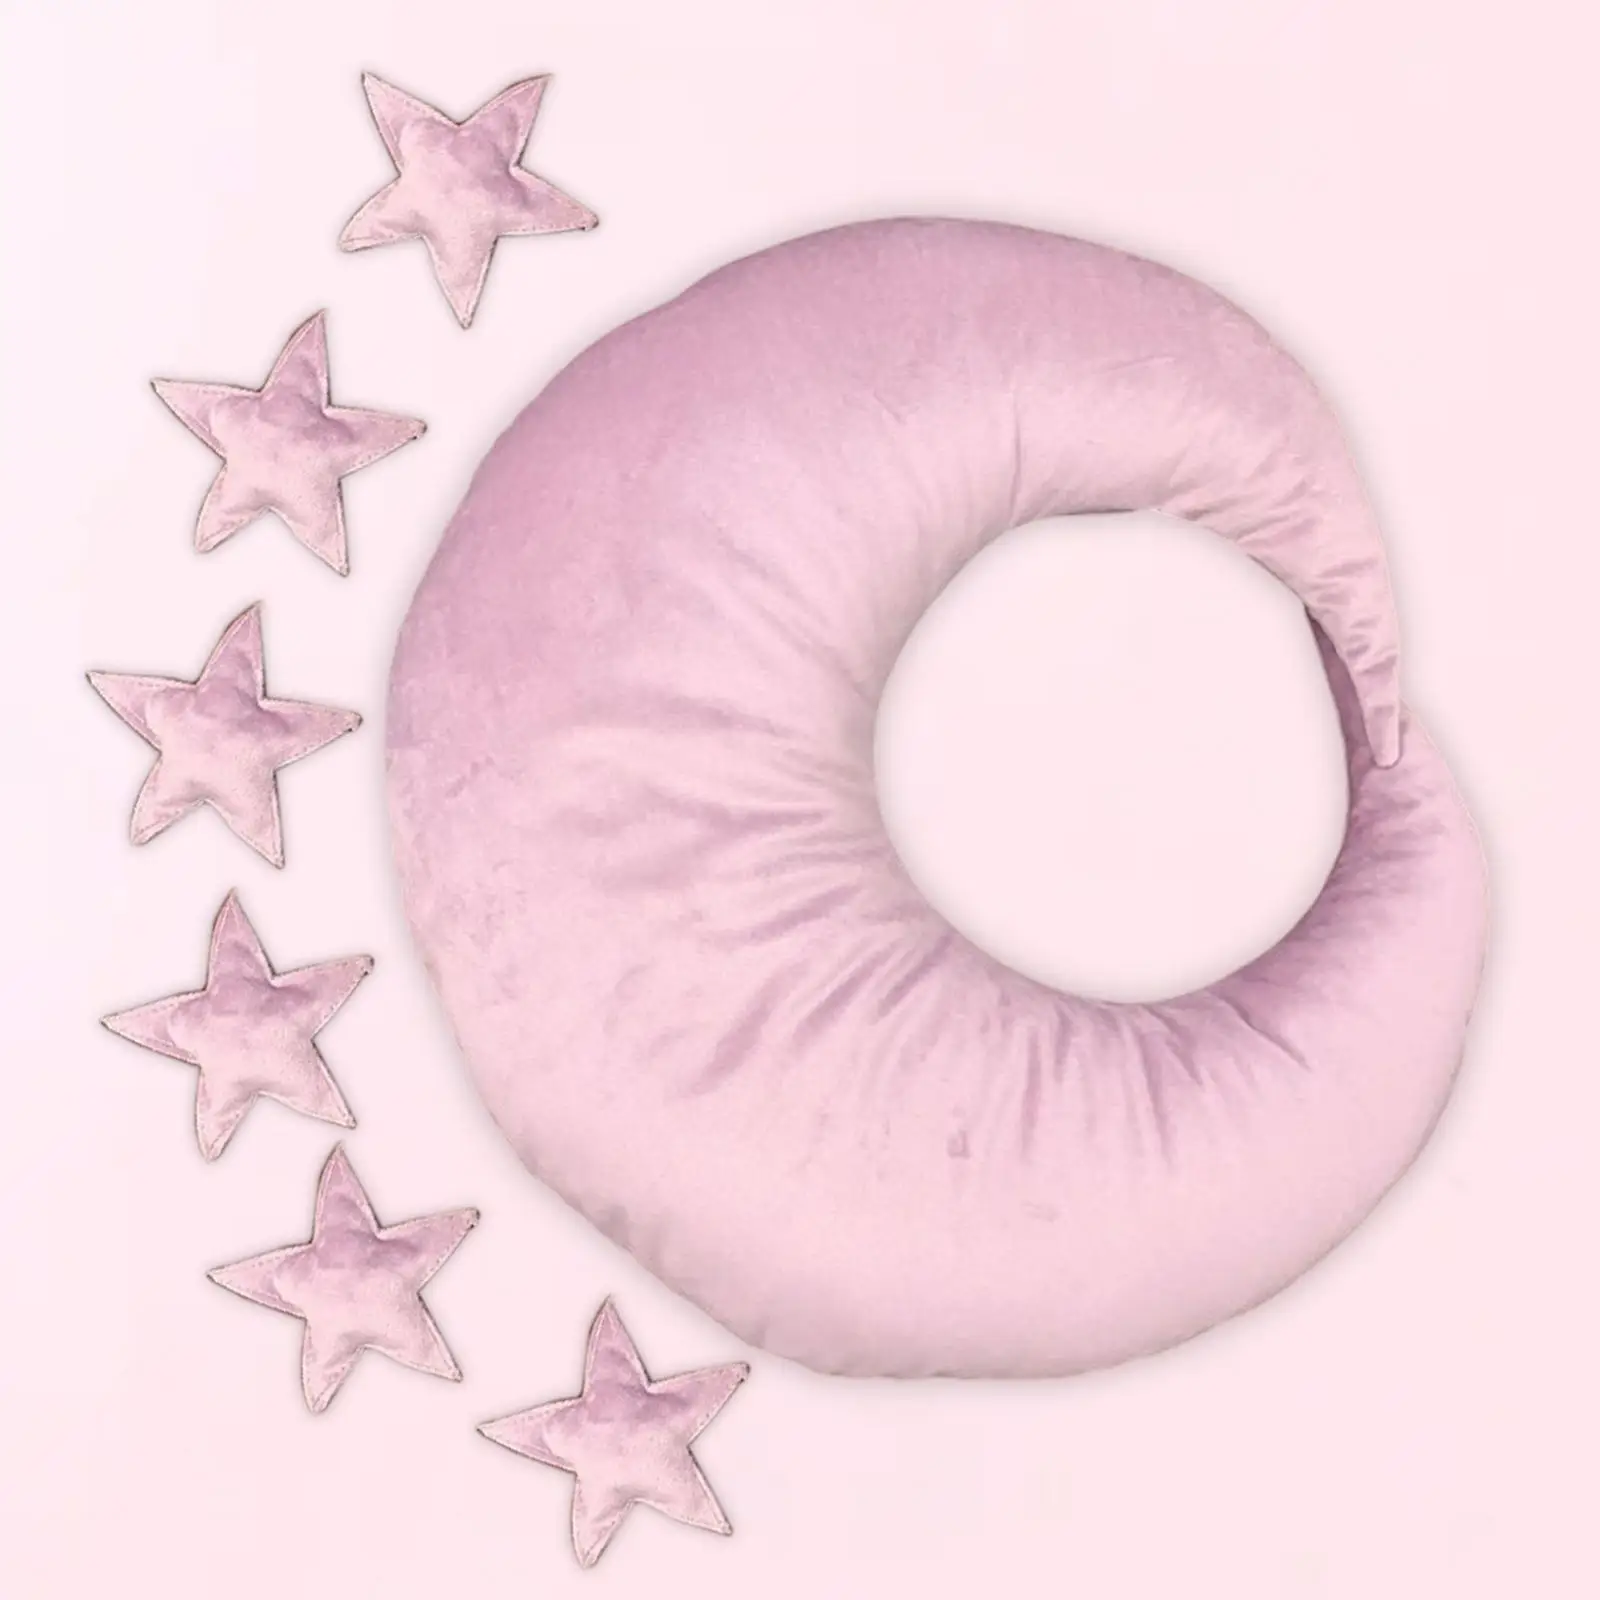 Baby Photo Prop Moon Shape Pillow Mini Photo Props Photography Accessories for Twins Princess